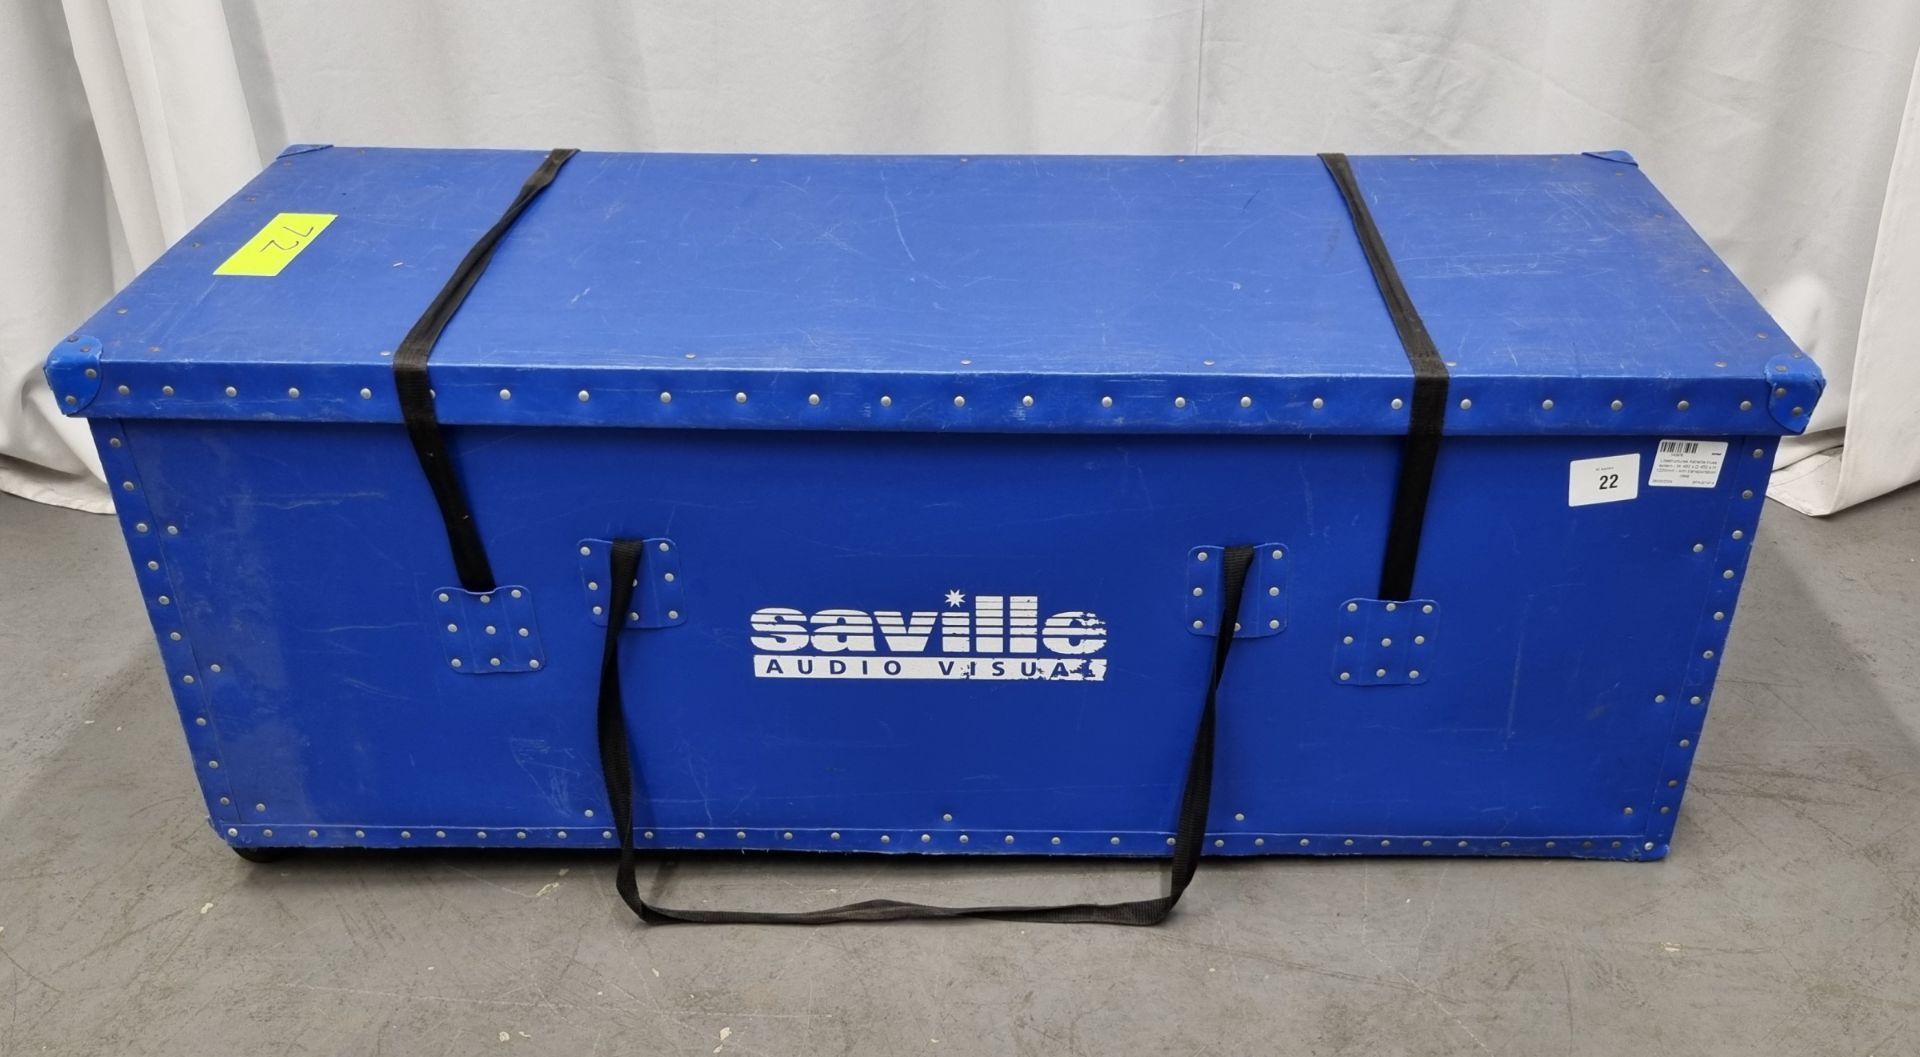 Litestructures Astralite truss lectern - W 480 x D 450 x H 1220mm - with transportation case - Image 4 of 5